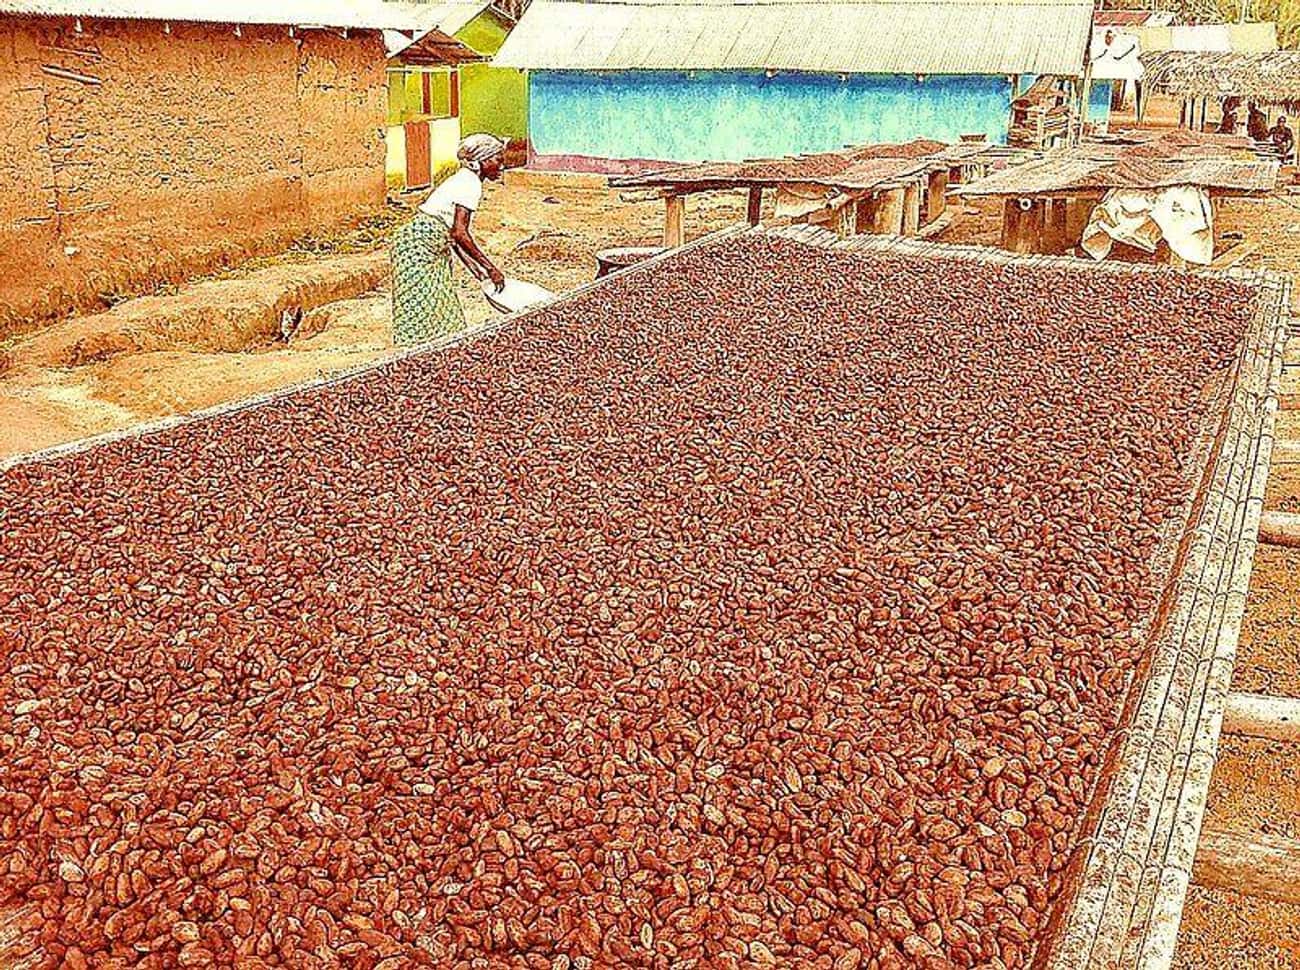 The Majority Of The World's Cacao Comes From Africa